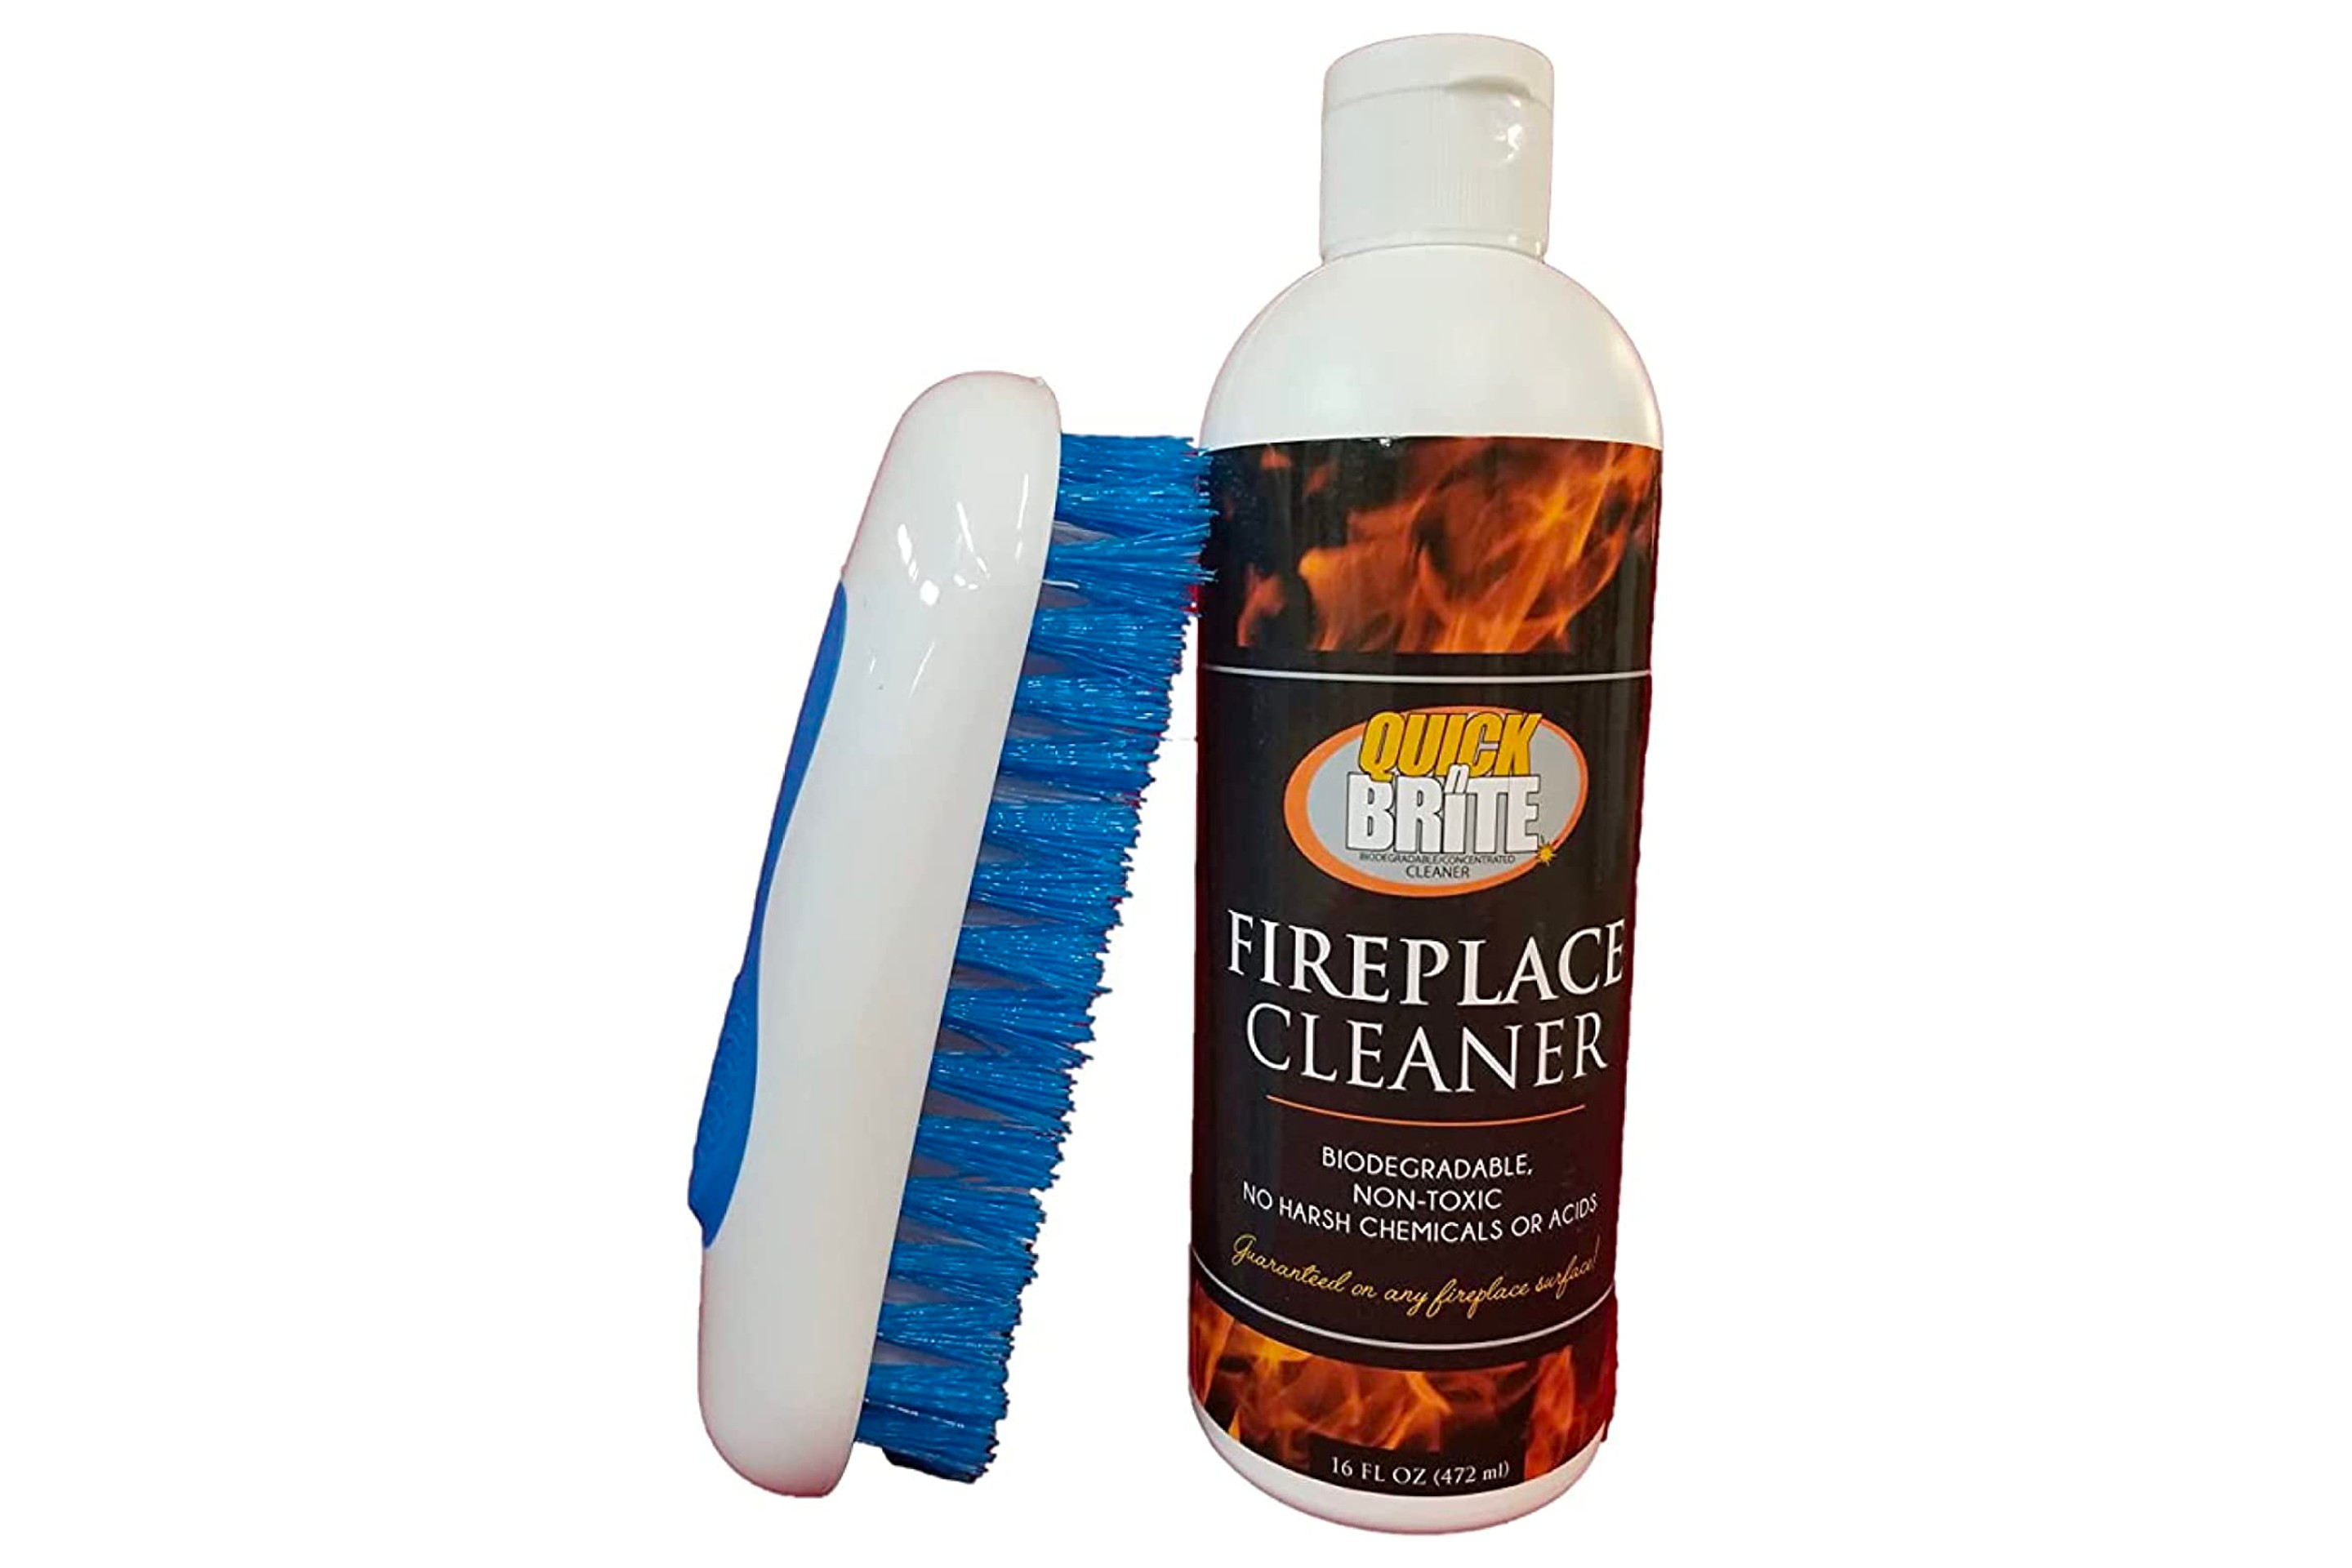 Fireplace cleaner 16 ounce from Quick N Brite